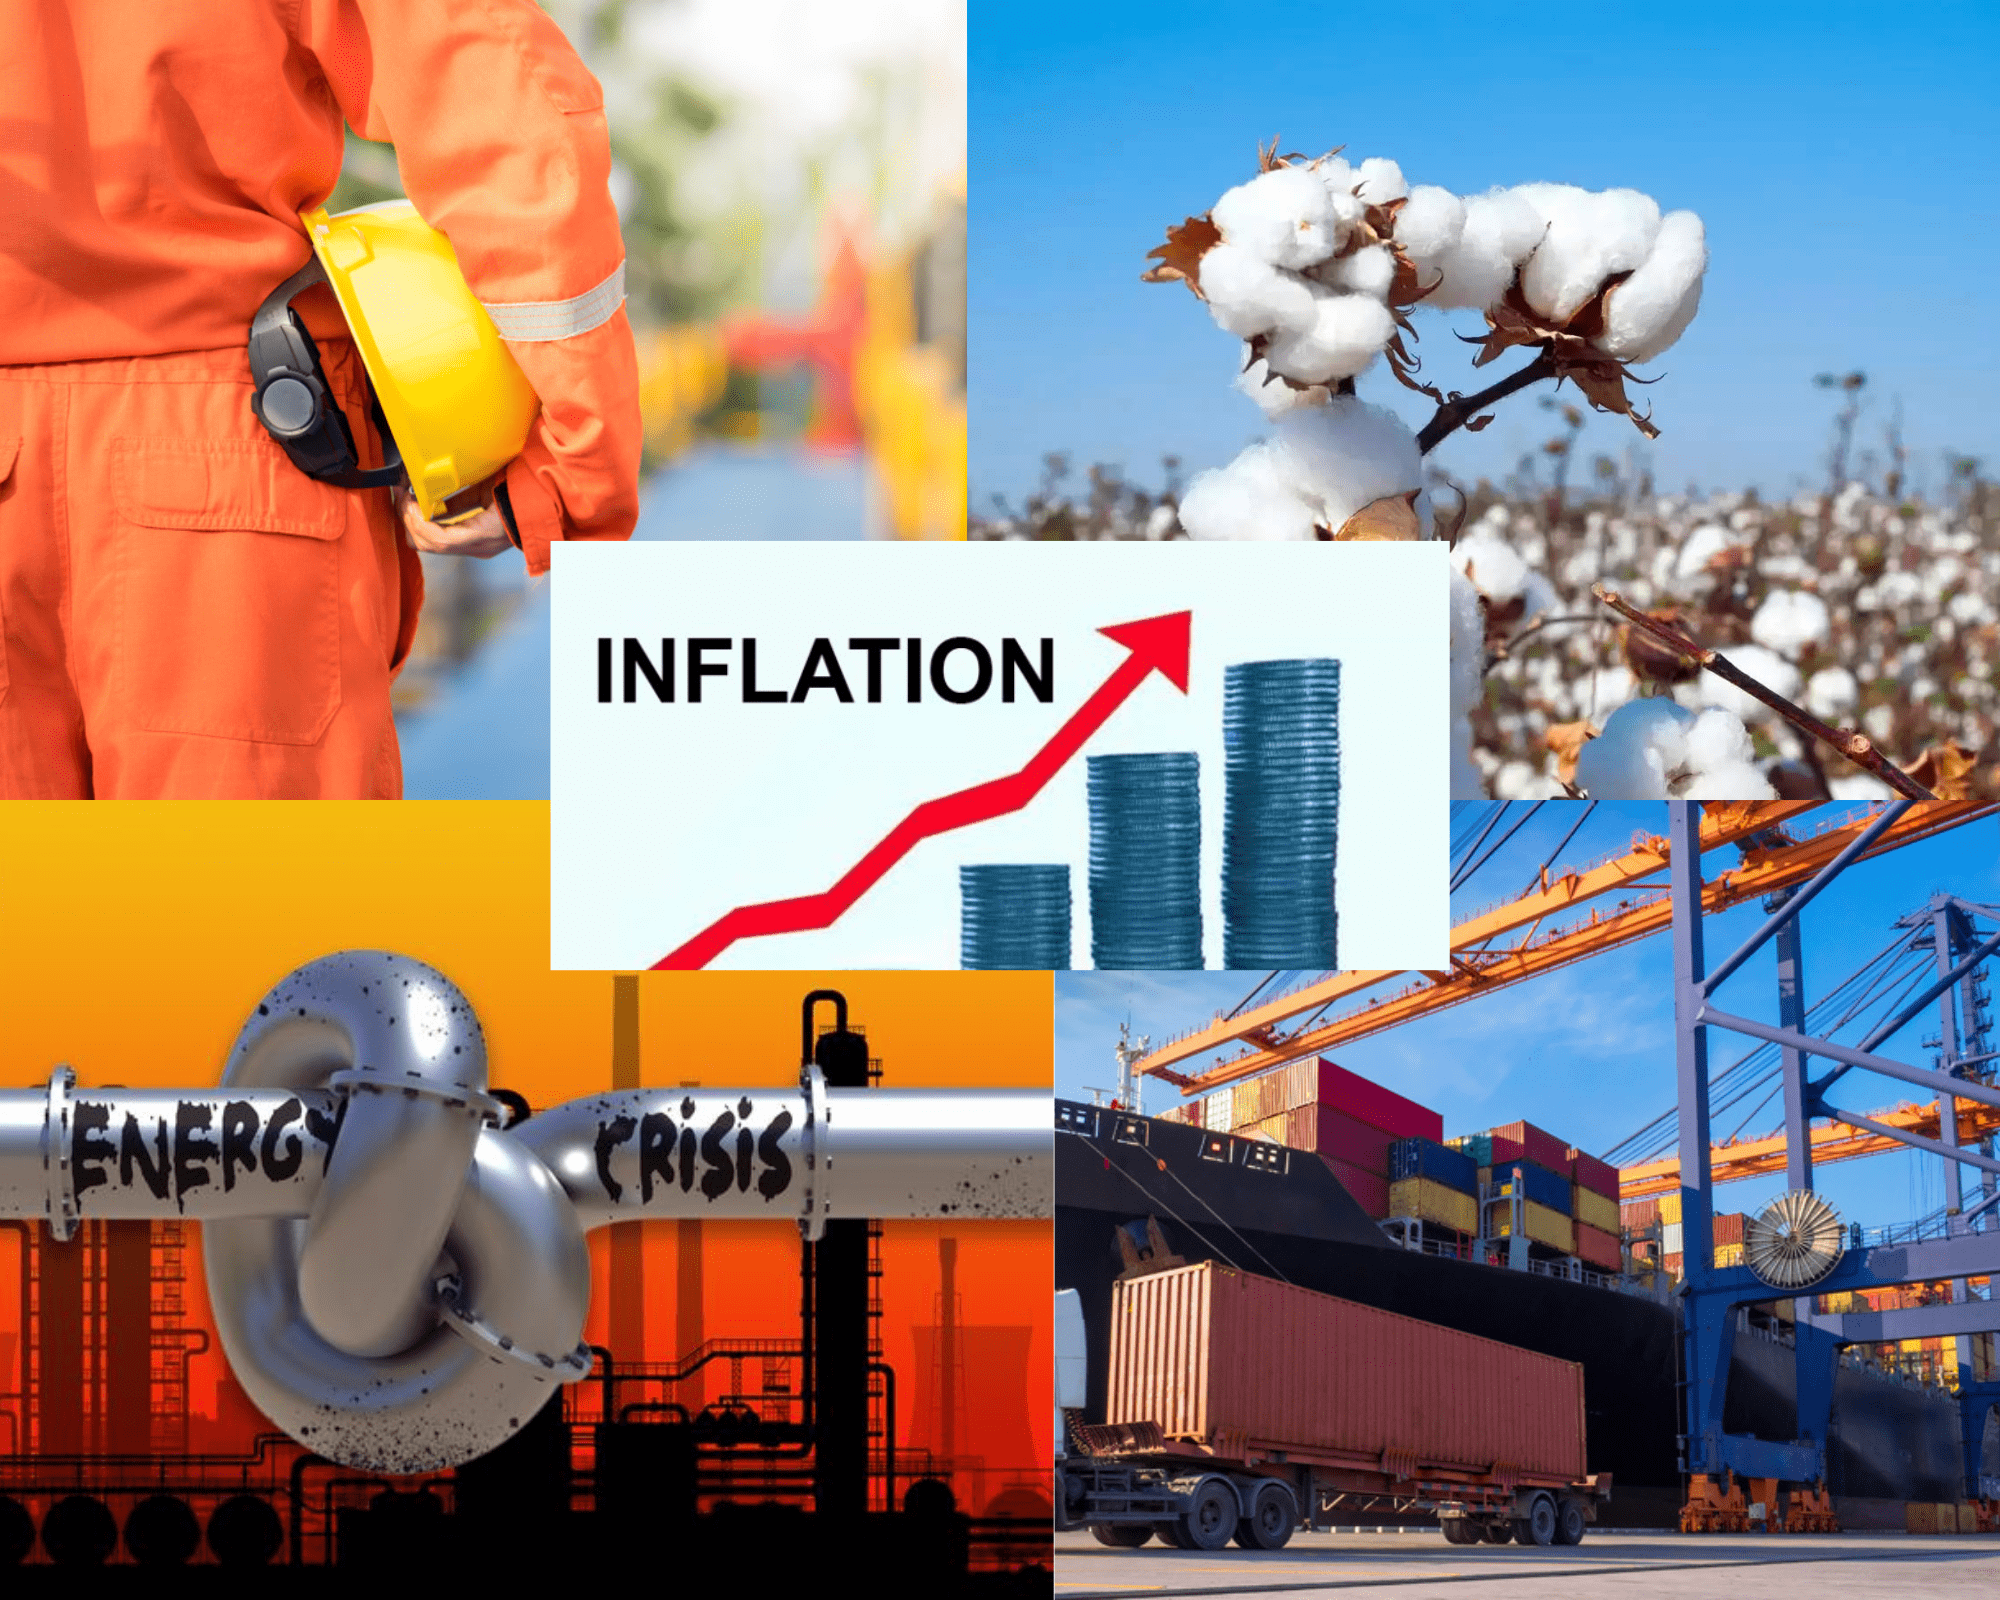 INFLATION IMPACTS THE WORKWEAR AND EPI INDUSTRY